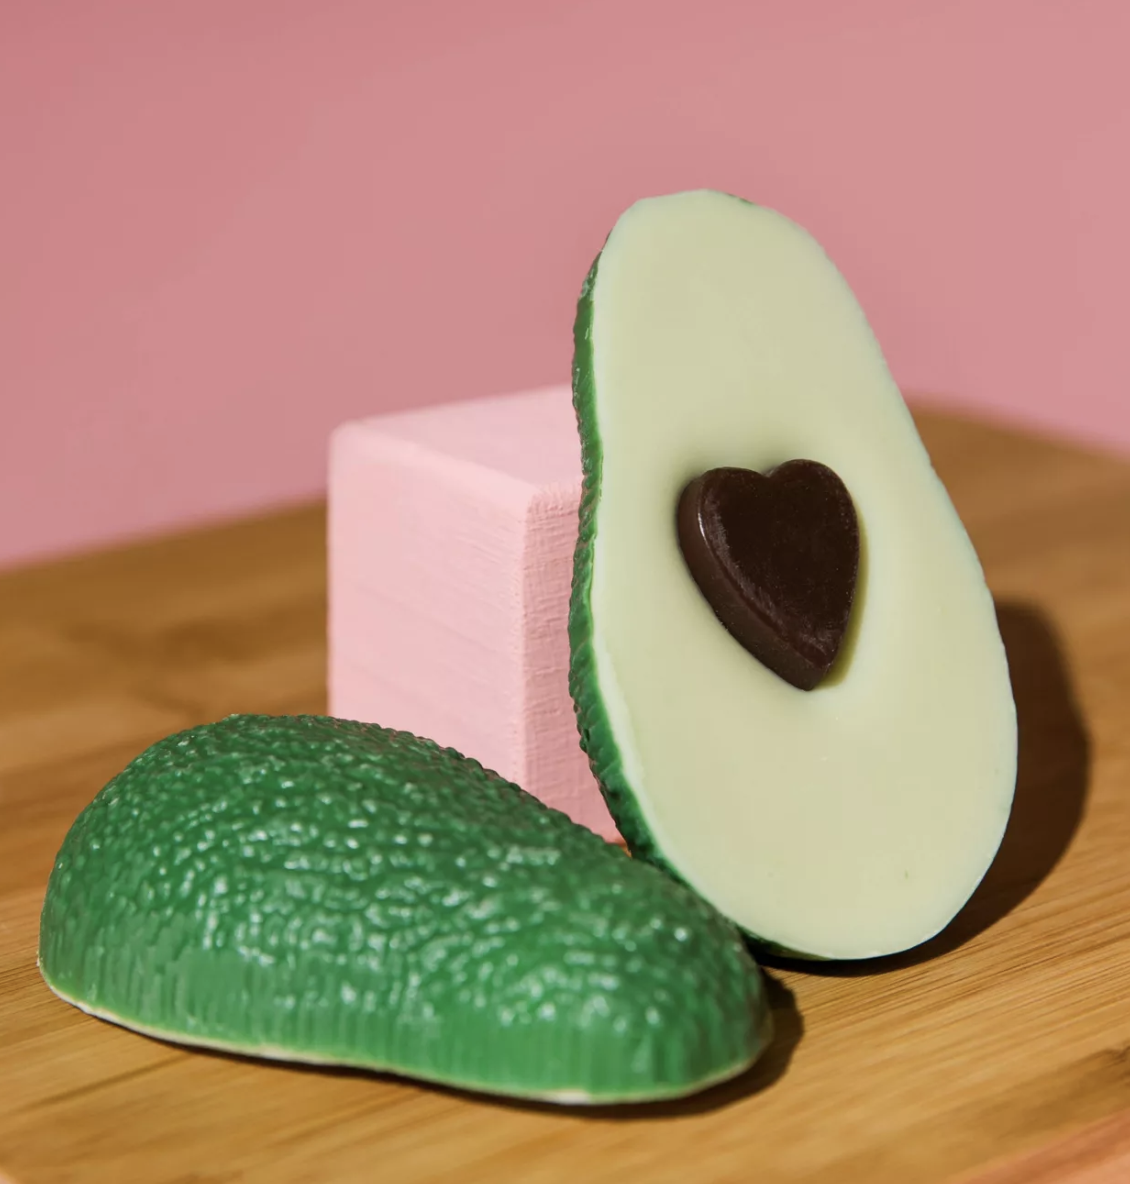 the avocado chocolate with heart-shaped pit 